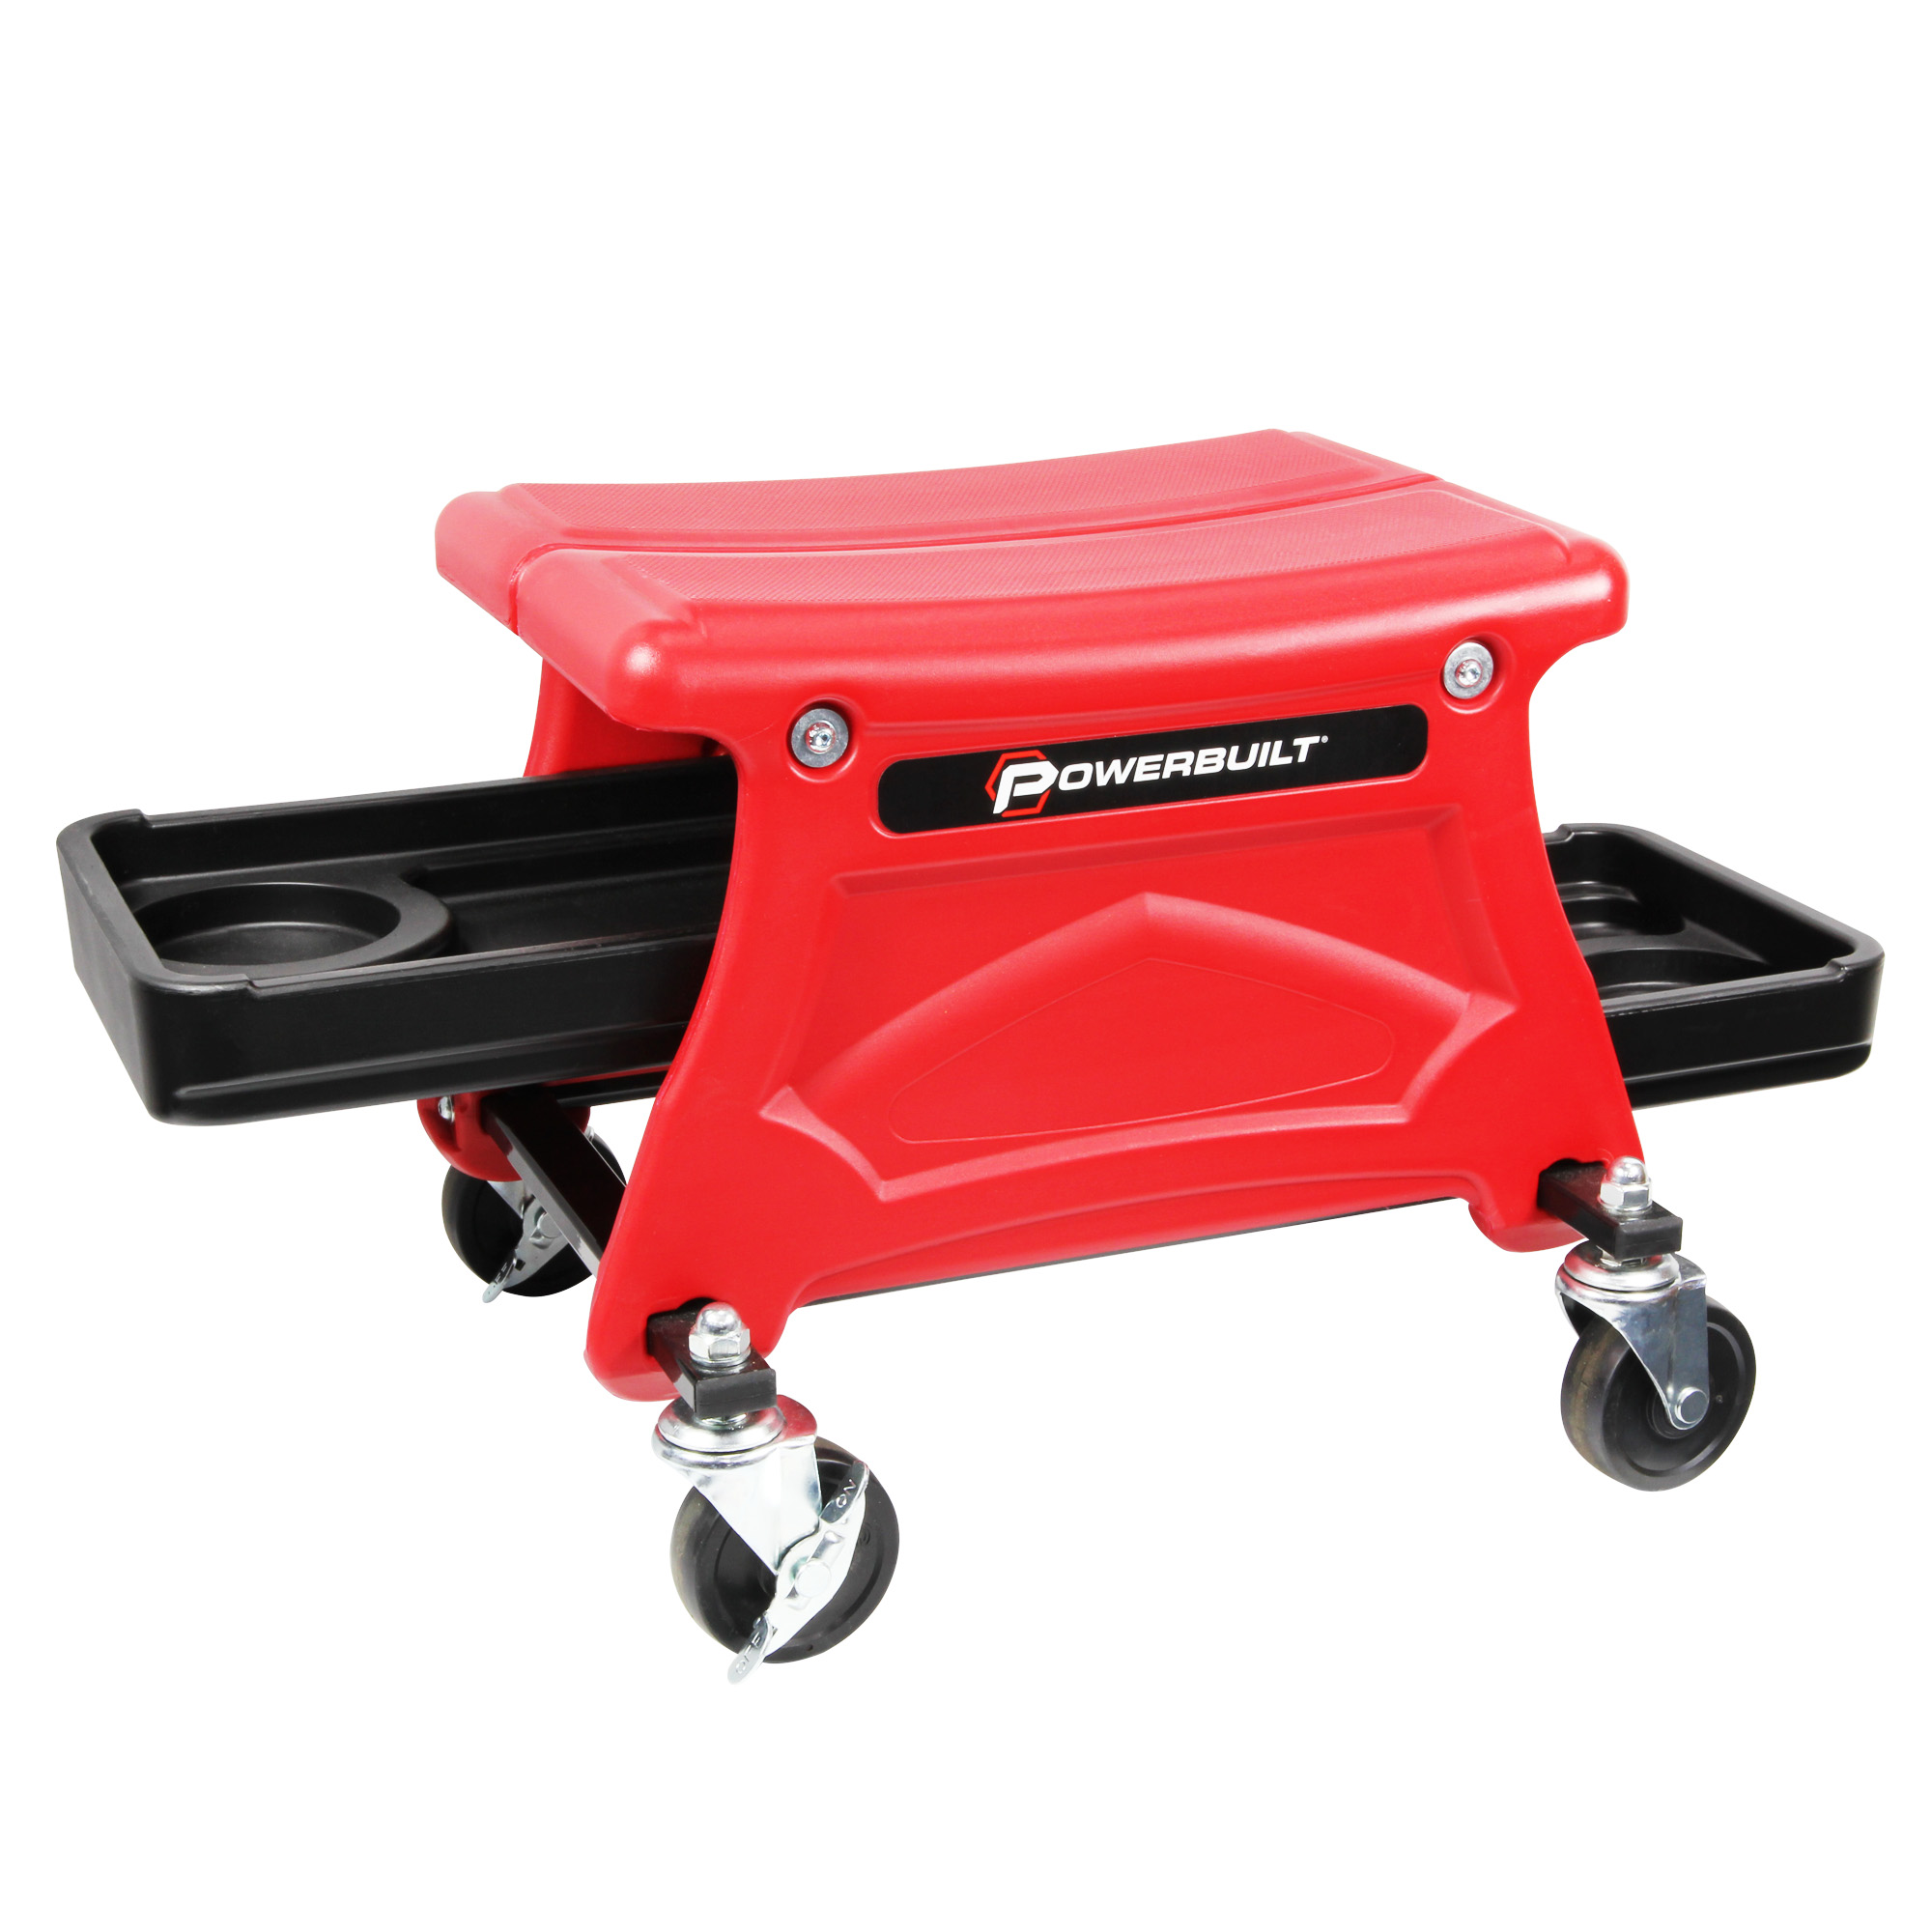 Powerbuilt Heavy Duty Compact Rolling Seat with Storage Trays - 240283